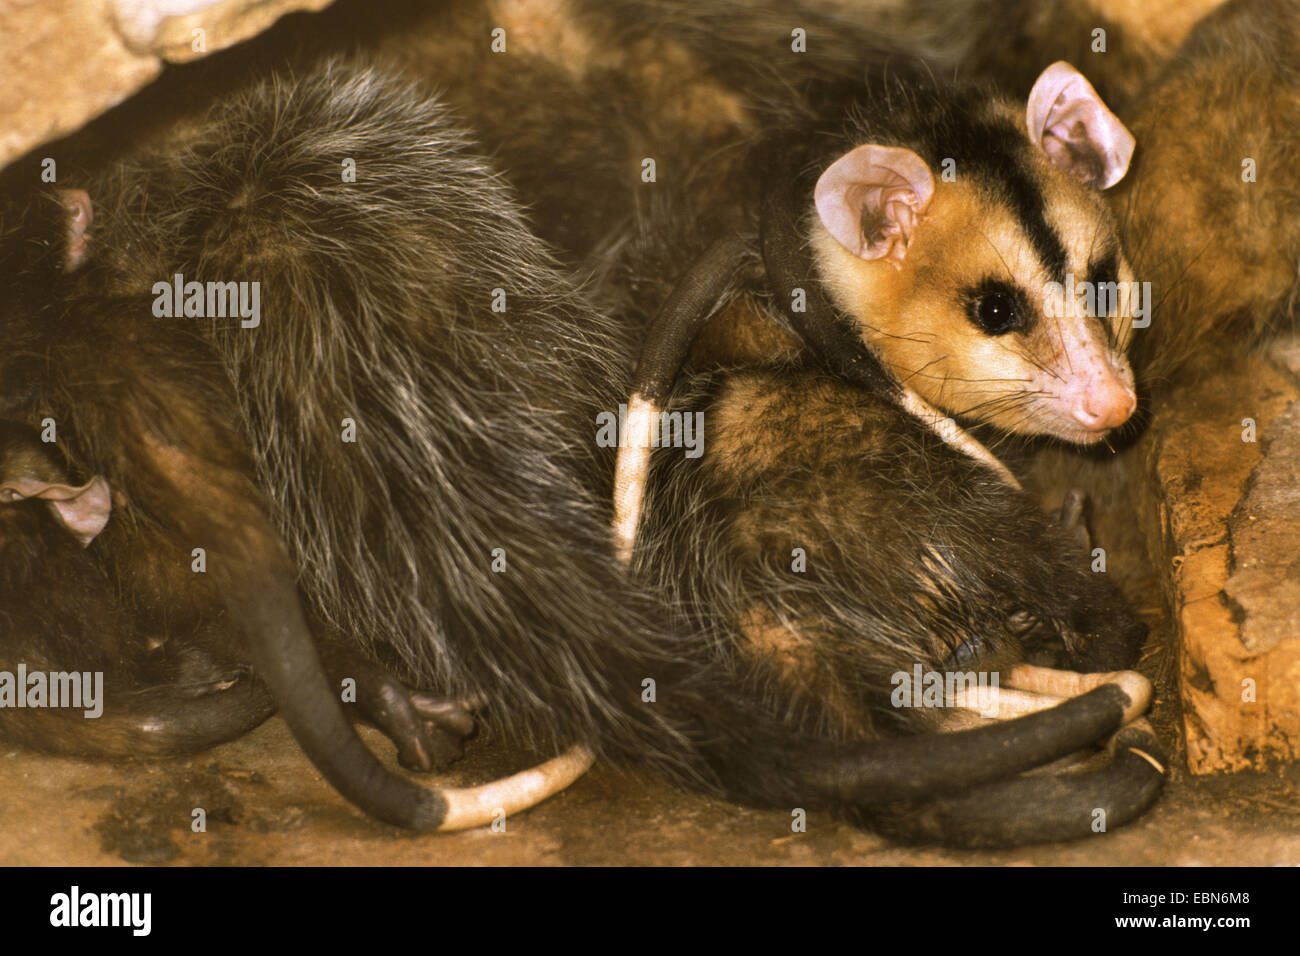 White-eared opossum (Didelphis albiventris), in hiding-place Stock Photo